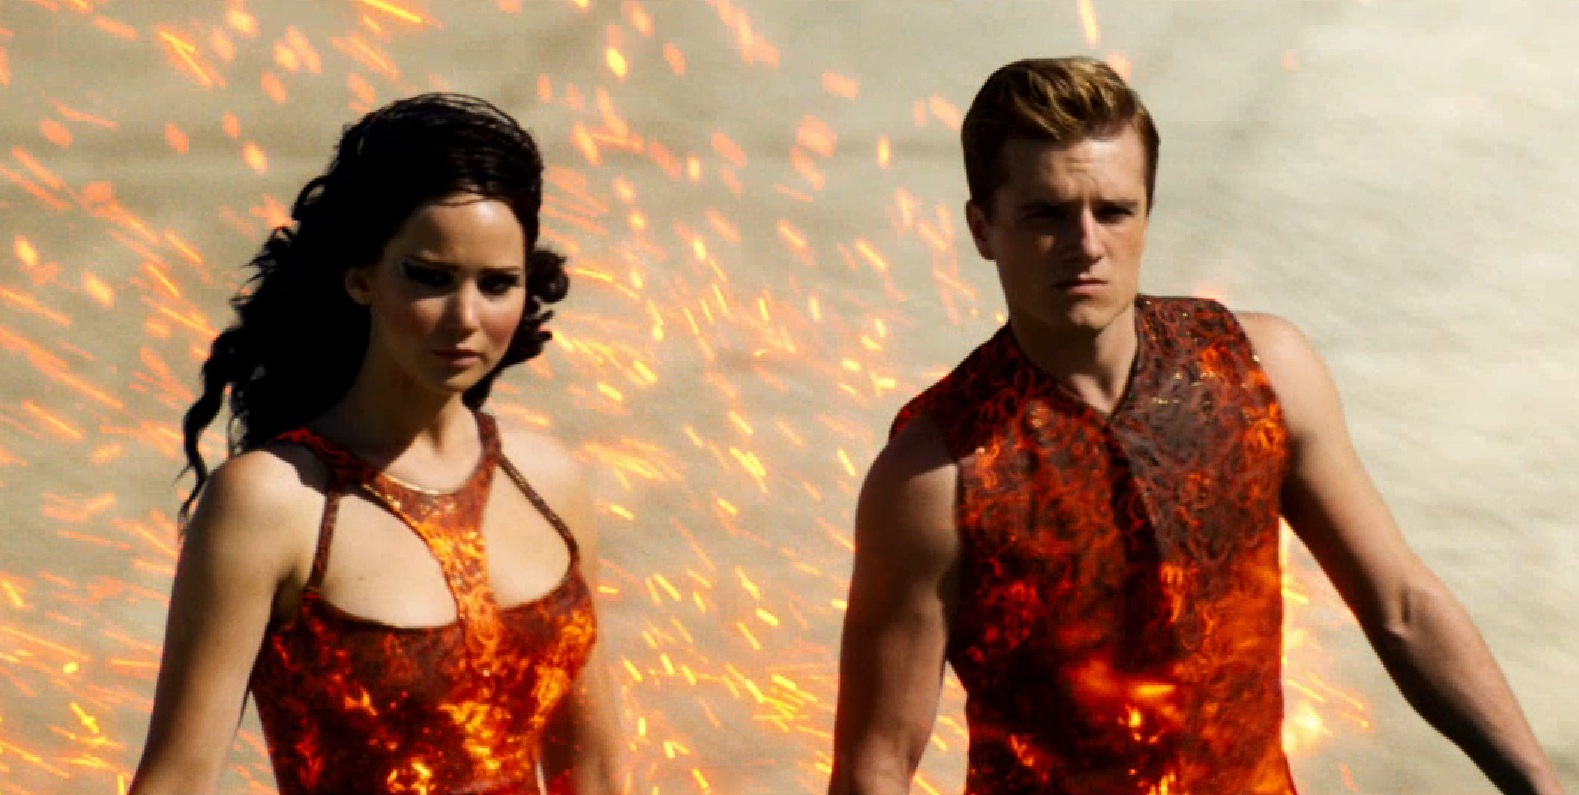 The Hunger Games: Catching Fire Review Roundup